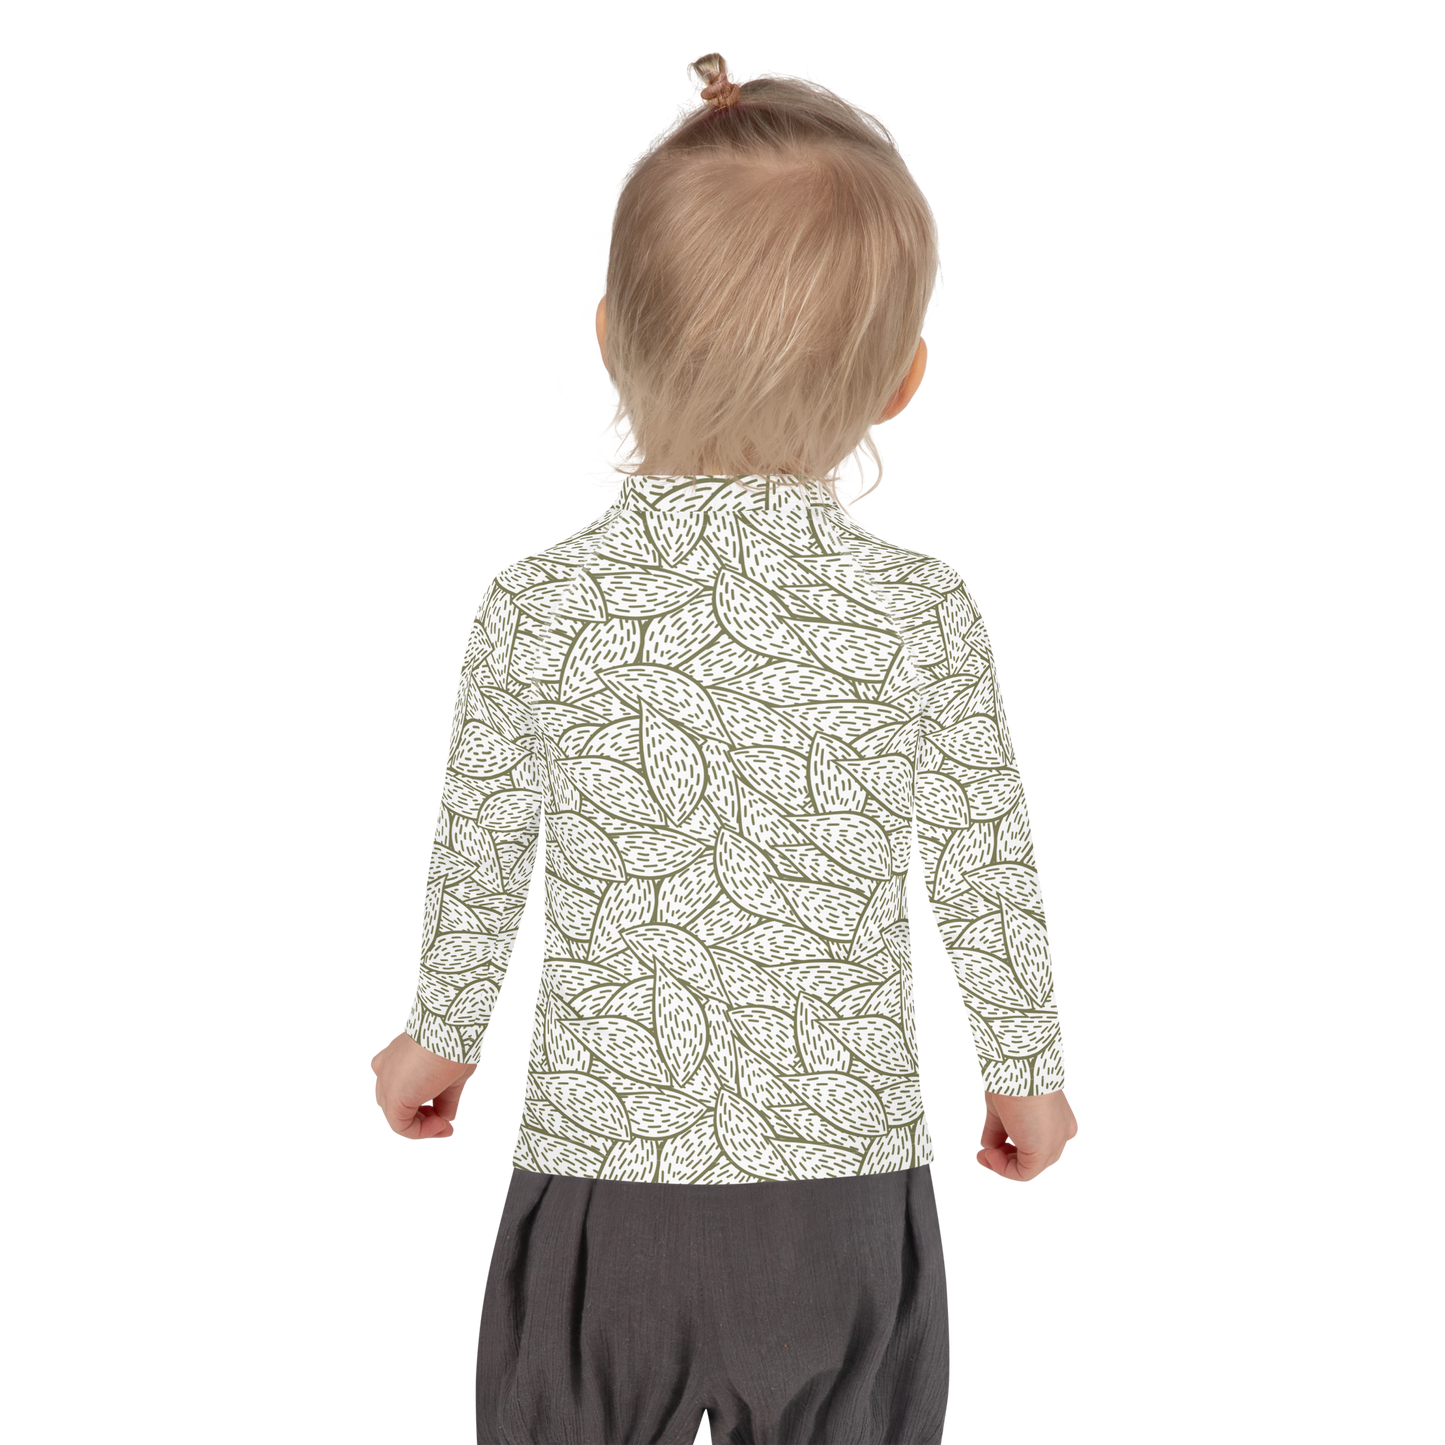 Colorful Fall Leaves | Seamless Patterns | All-Over Print Kids Rash Guard - #6